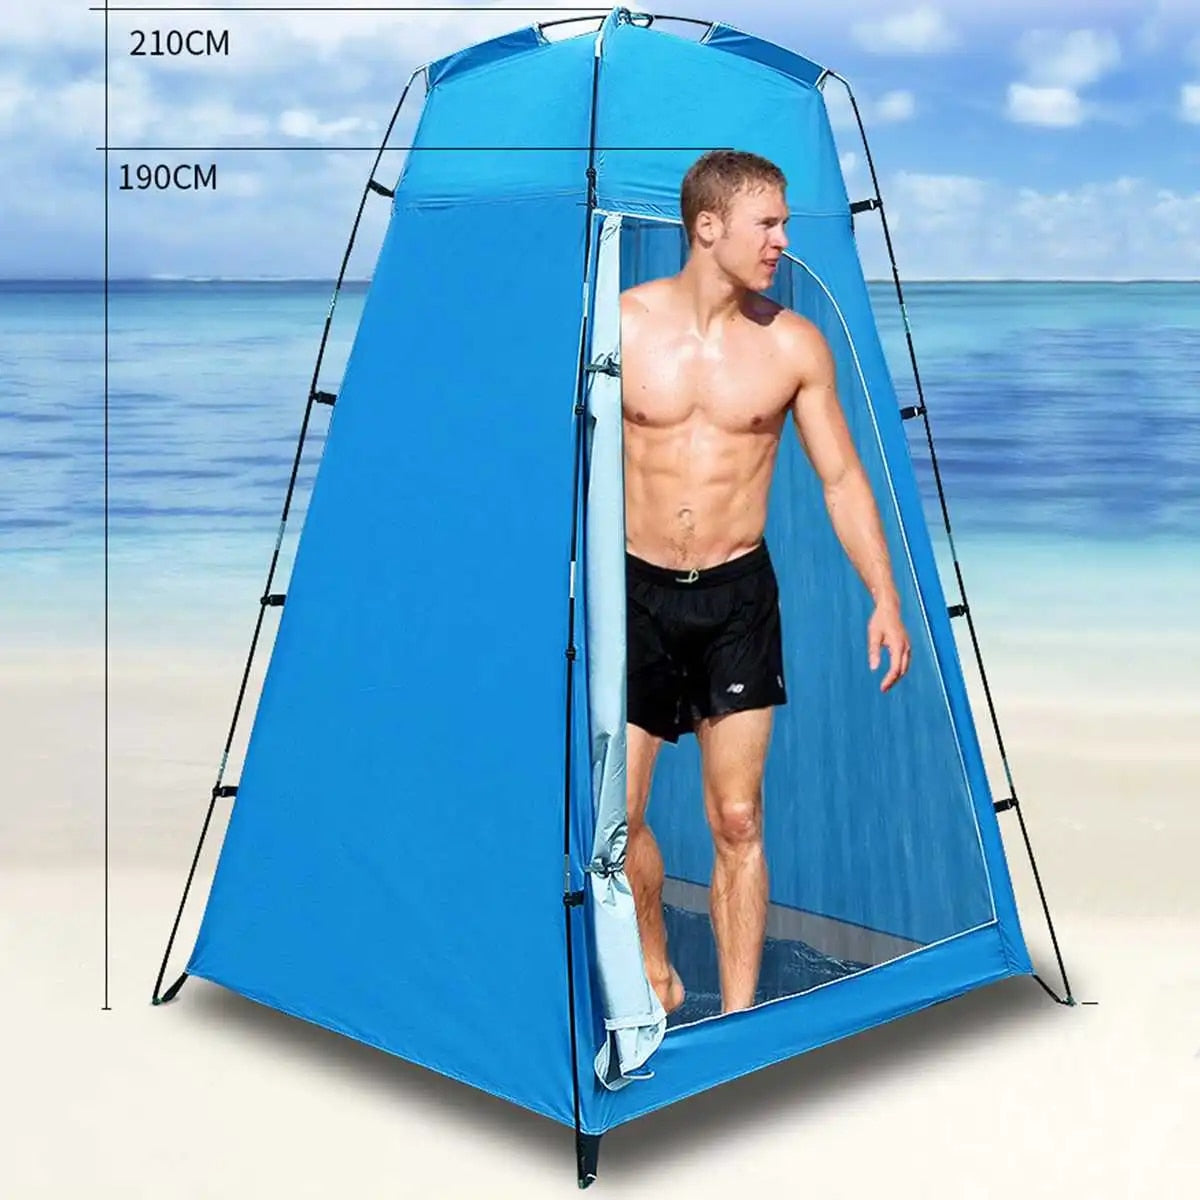 Portable Pop Up Privacy Tent, Outdoor Camping Bathroom Toilet Shower Tent Spacious Dressing Changing Room for Hiking Beach Picnic Fishing - Delicate Leather